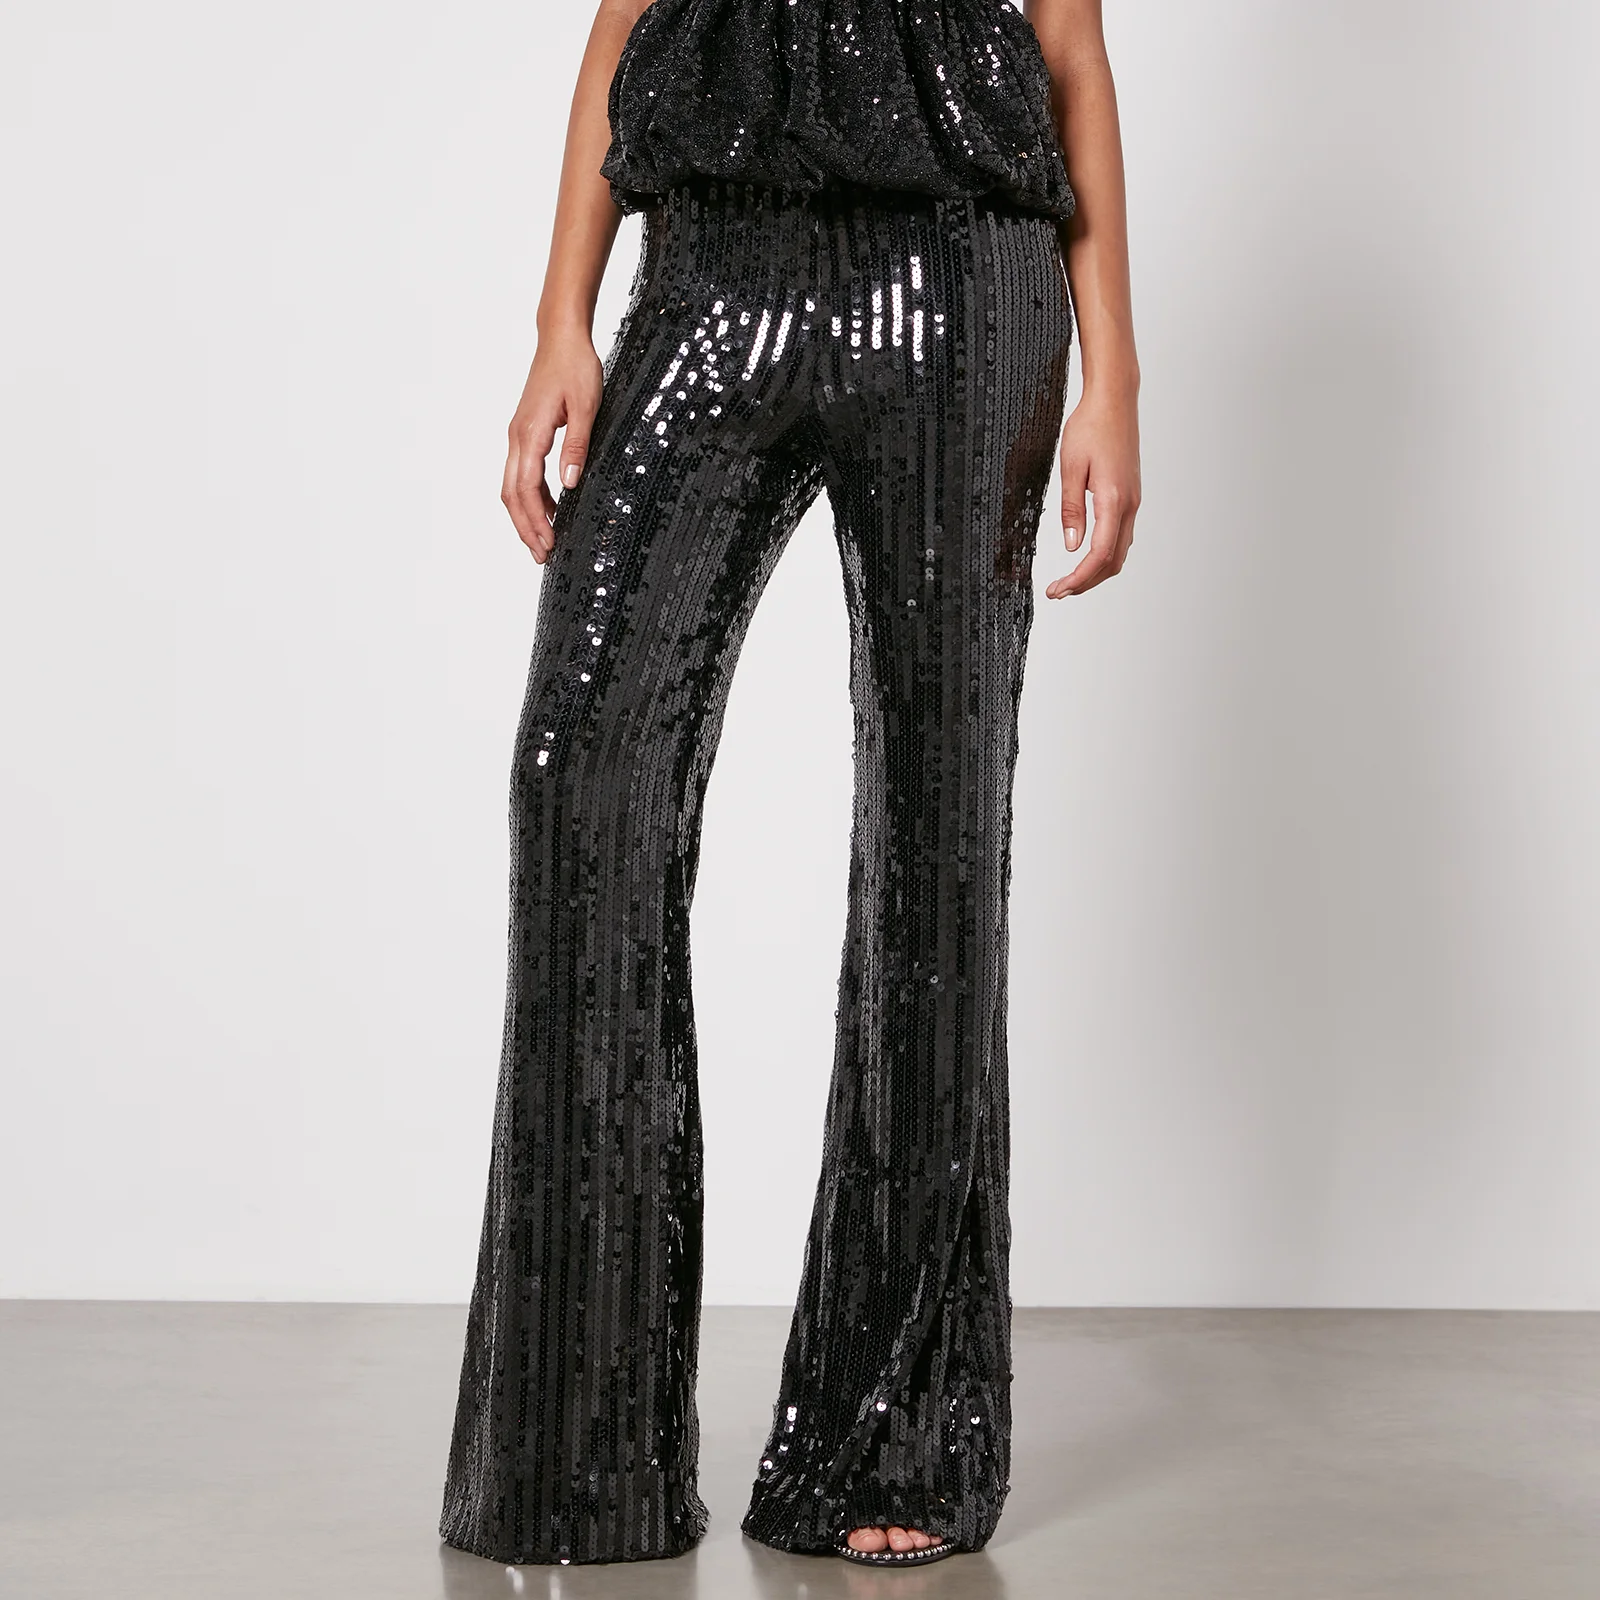 ROTATE Birger Christensen Sequinned Mesh Flared Trousers Image 1